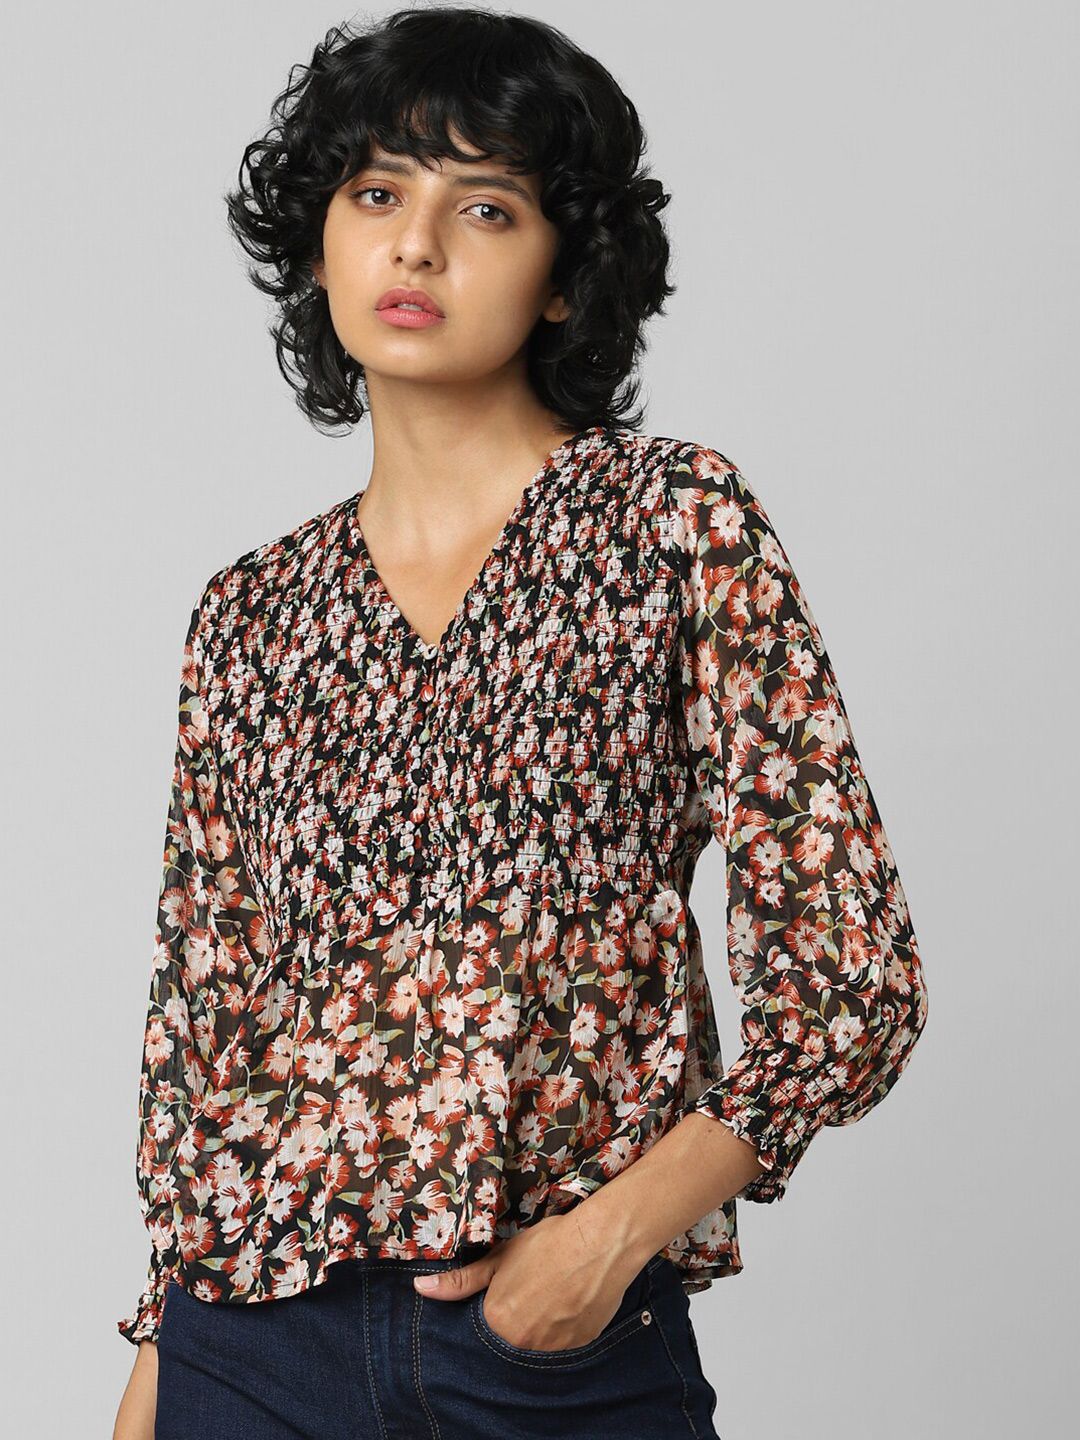 ONLY Black & Orange Floral Printed Shirt Style Top Price in India